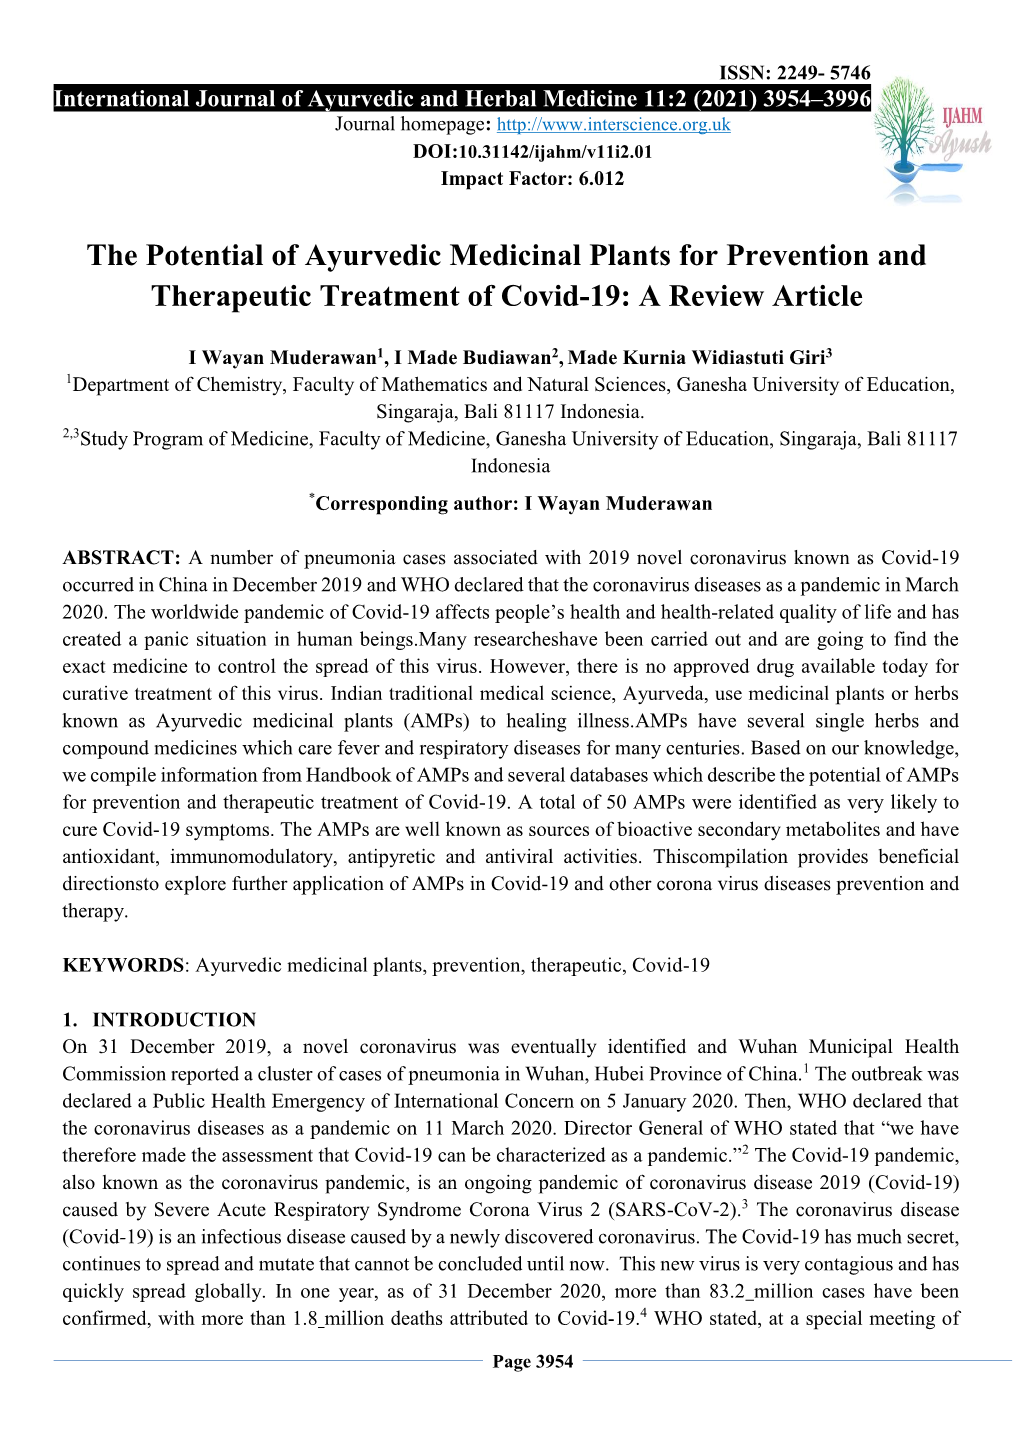 The Potential of Ayurvedic Medicinal Plants for Prevention and Therapeutic Treatment of Covid-19: a Review Article